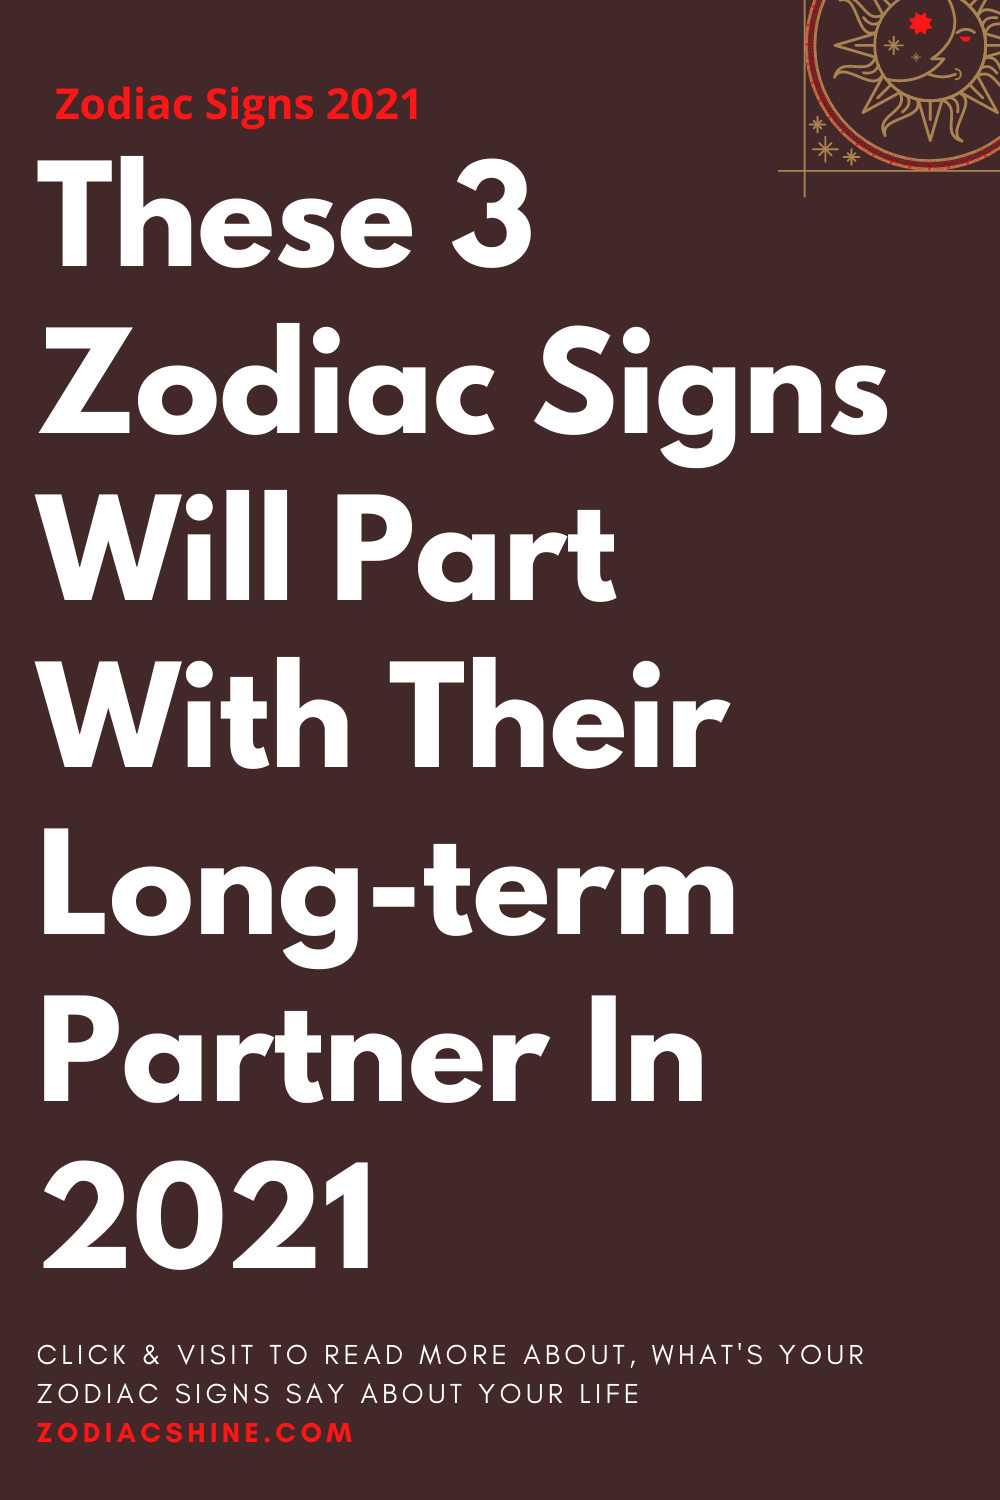 These 3 Zodiac Signs Will Part With Their Long-term Partner In 2021